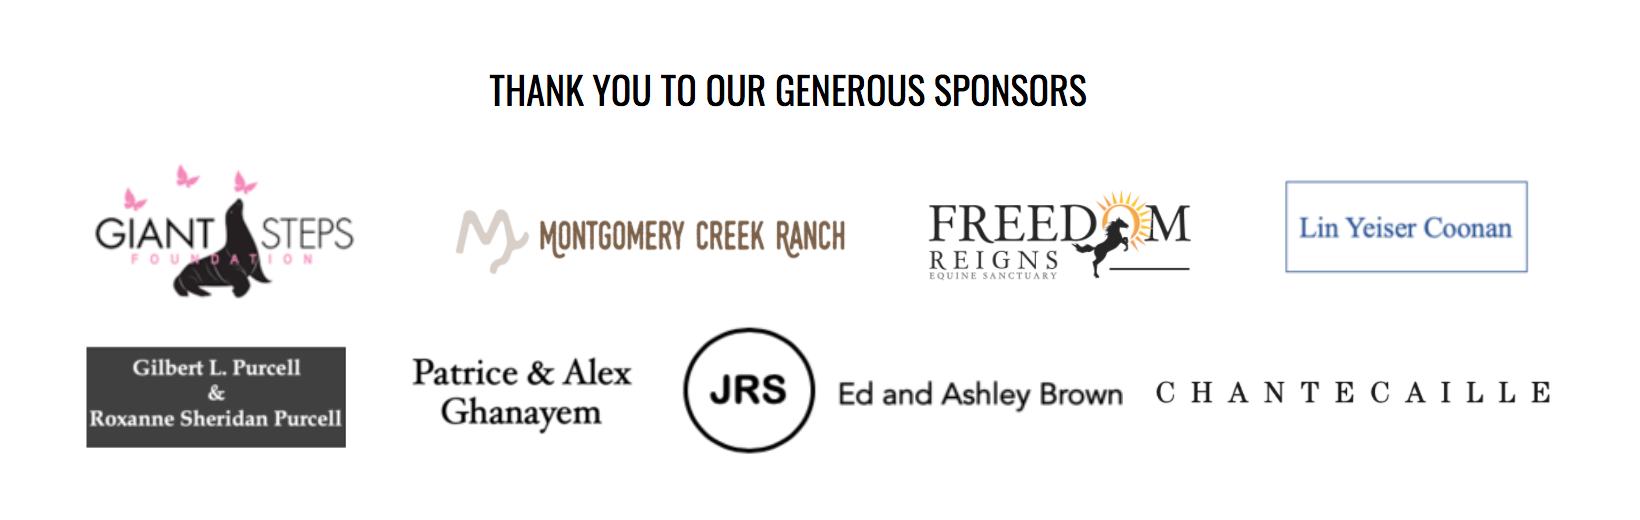 Thank you to our Generous Sponsors: Montgomery Creek Ranch, Giant Steps, Freedom Reigns, Lin Yeiser Coonan, Gilbert L. Purcell & Roxanne Sheridan Purcell, Patrice & Alex Ghanayem, Chantecaille, JRS, Ed and Ashley Brown